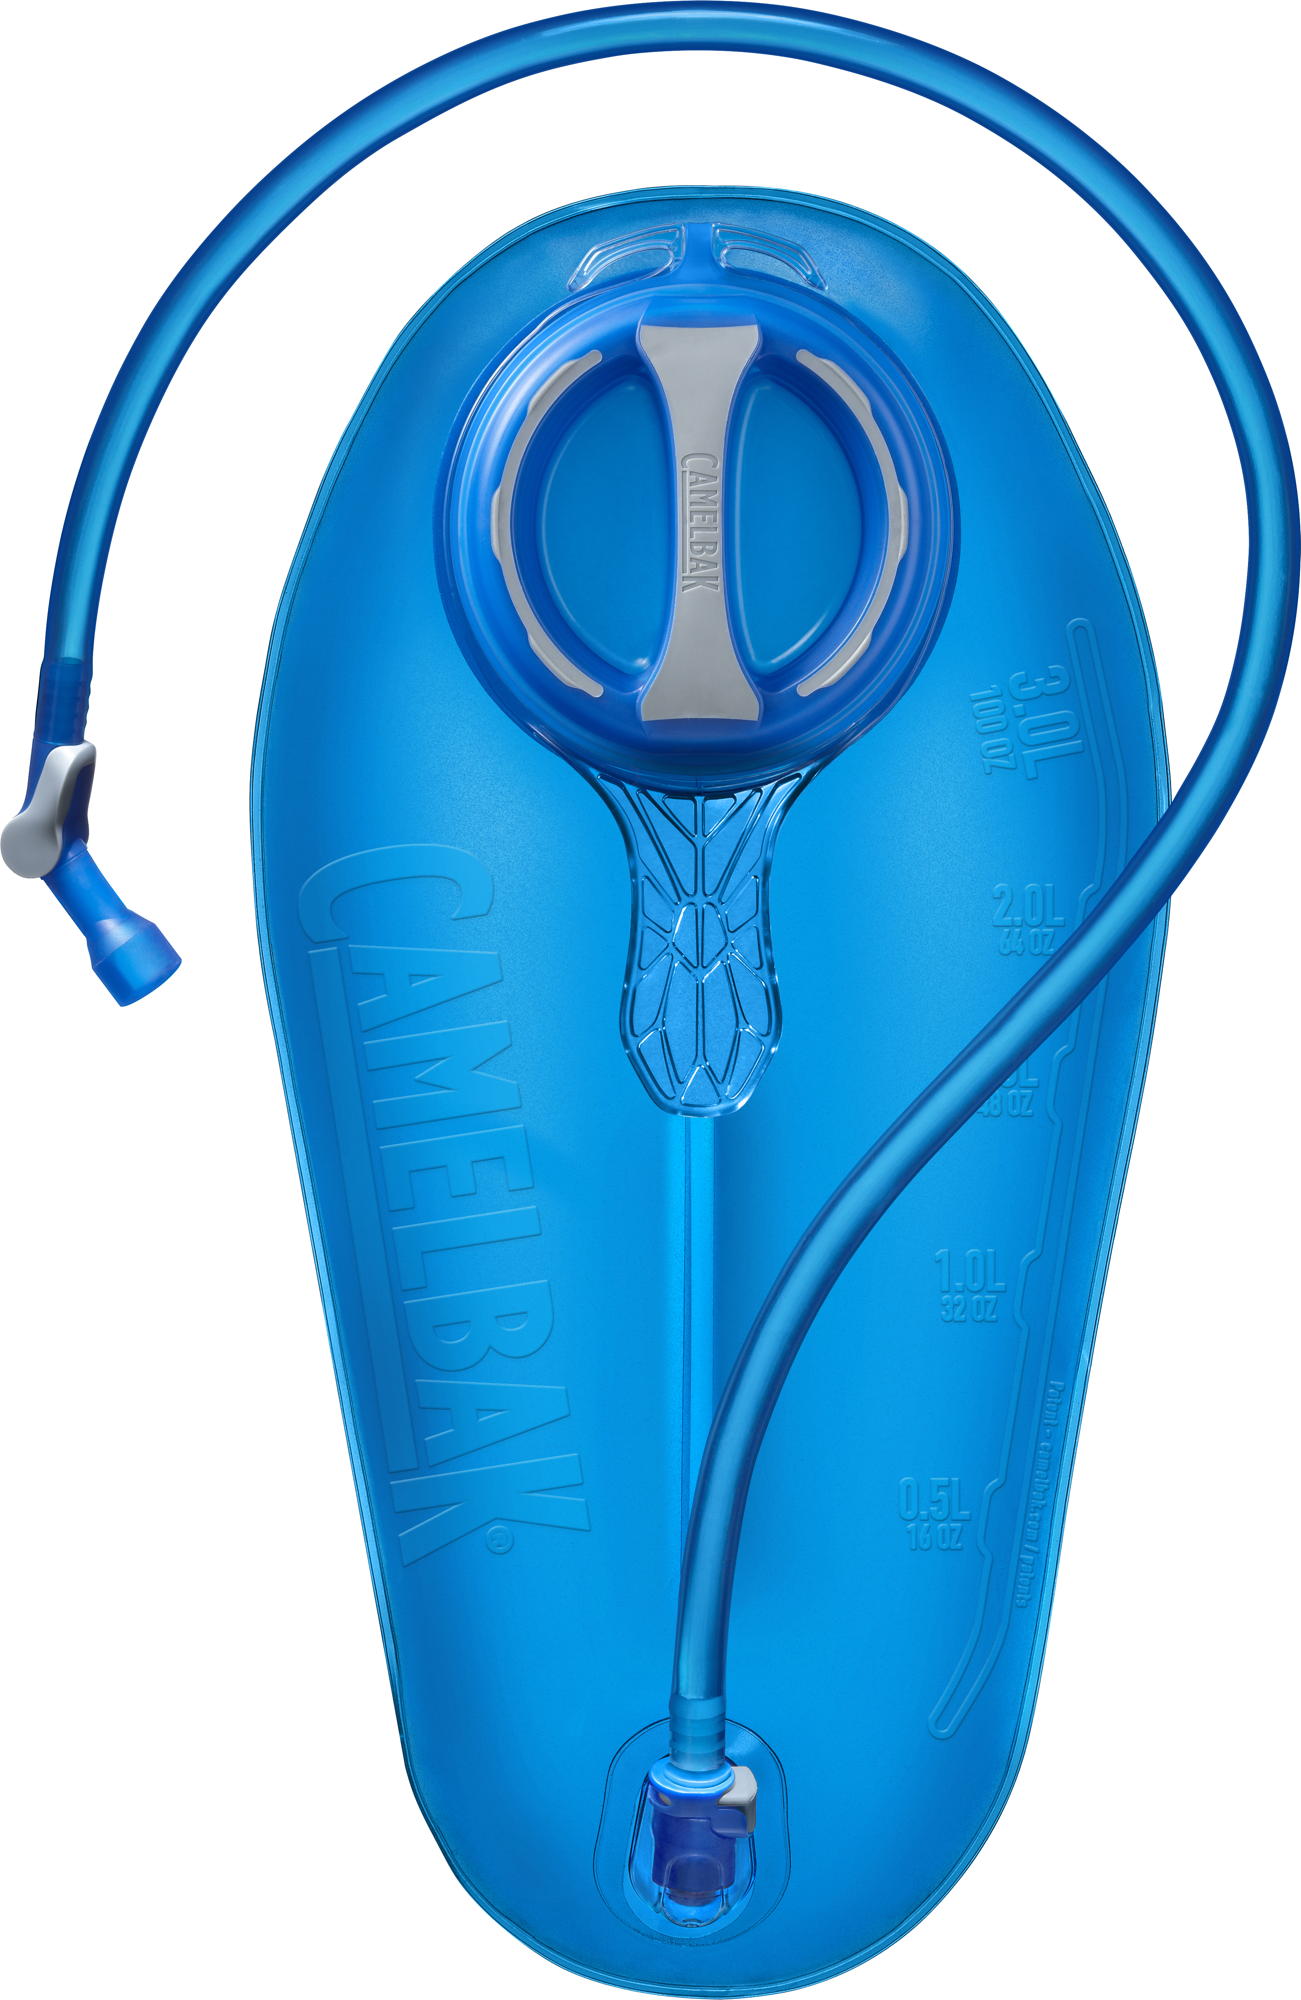 Camelbak Crux 3l Reservoir Blue -  - Mansfield Hunting & Fishing - Products to prepare for Corona Virus